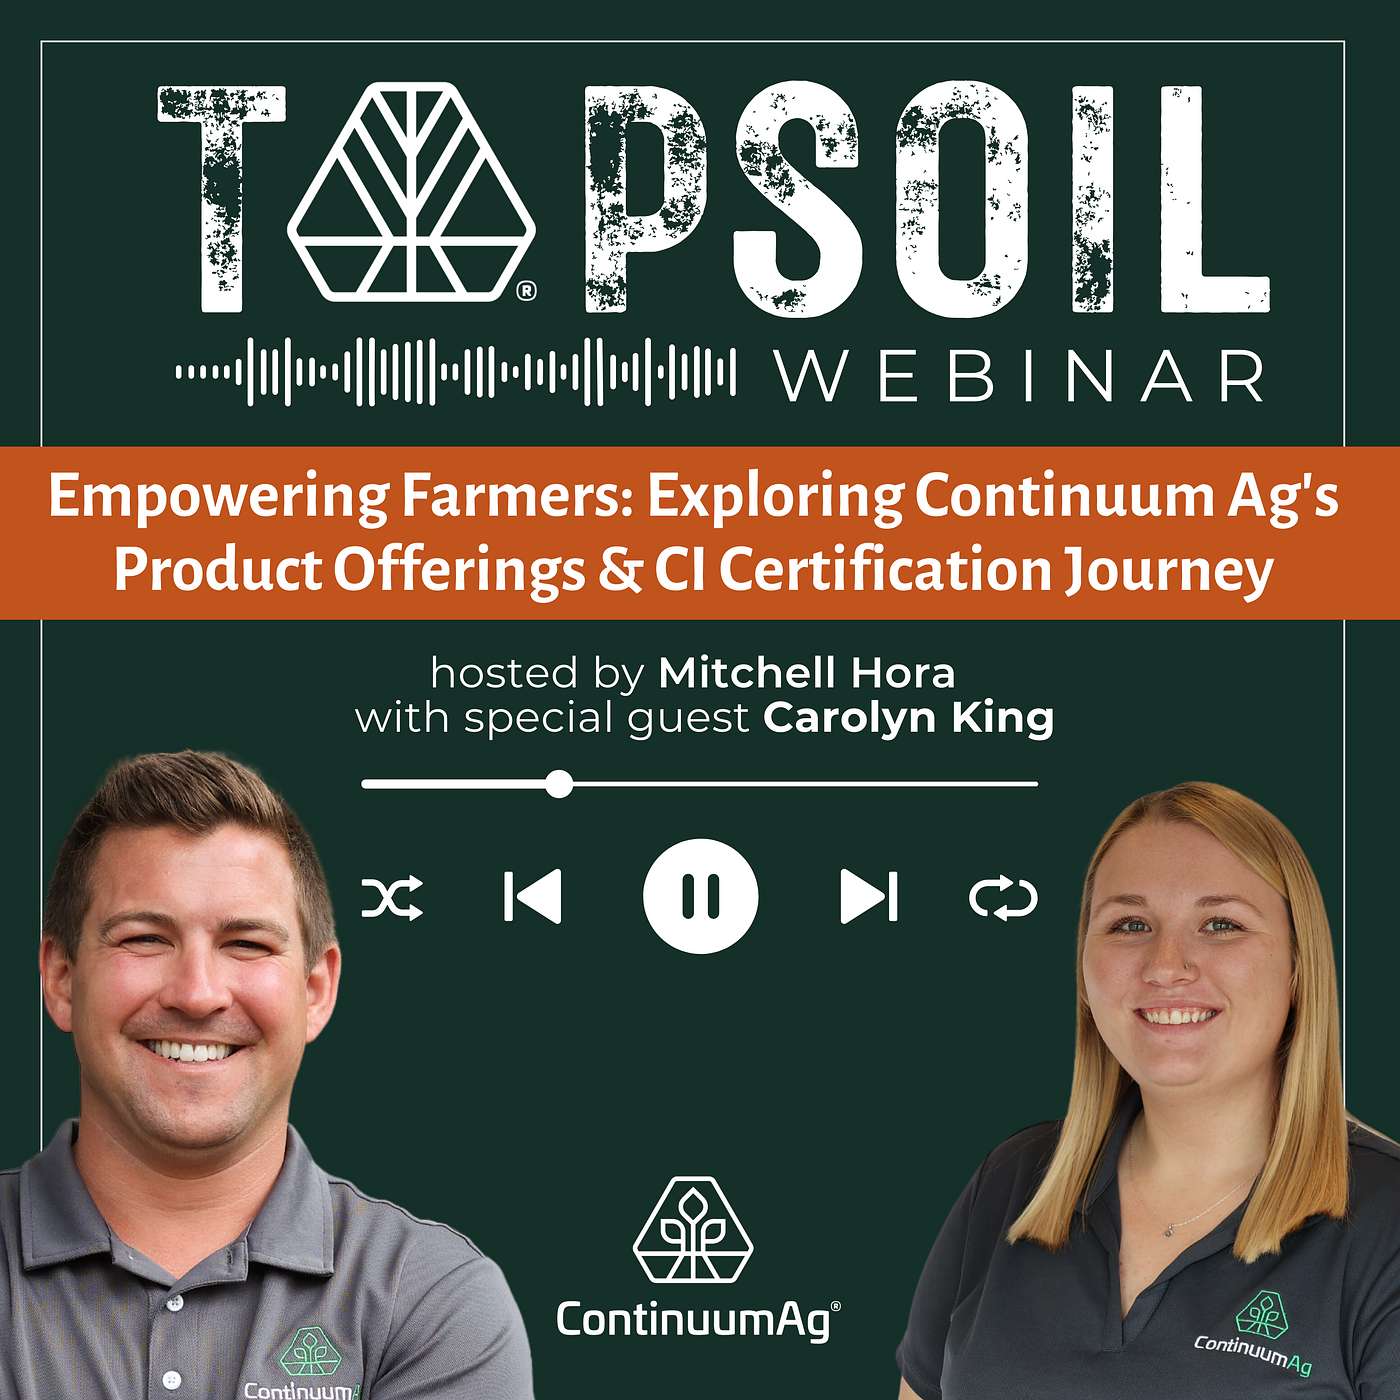 The TopSoil Webinar - Empowering Farmers: Exploring Continuum Ag's Product Offerings & CI Certification Journey | Top Soil Webinar cover art